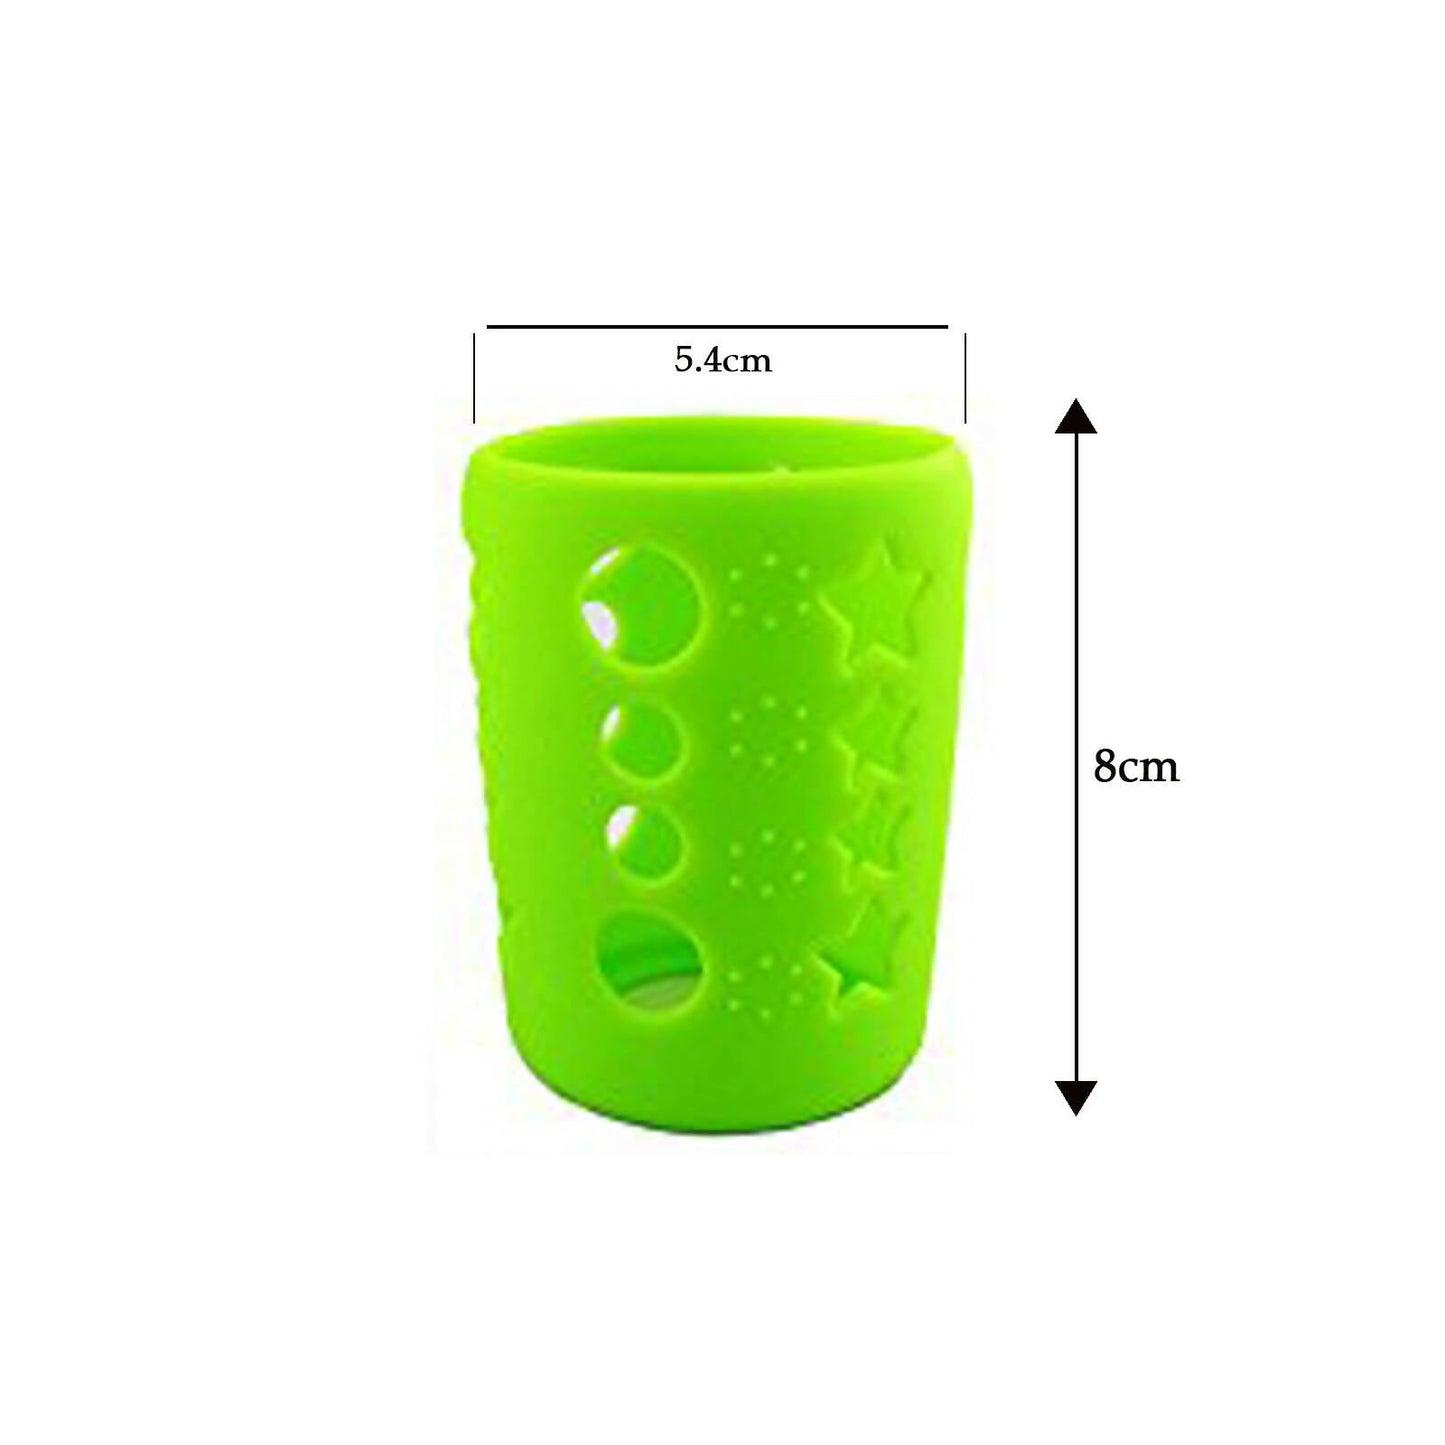 Safe-O-Kid Silicone Baby Feeding Bottle Cover Cum Sleeve for Insulated Protection 120mL- Green